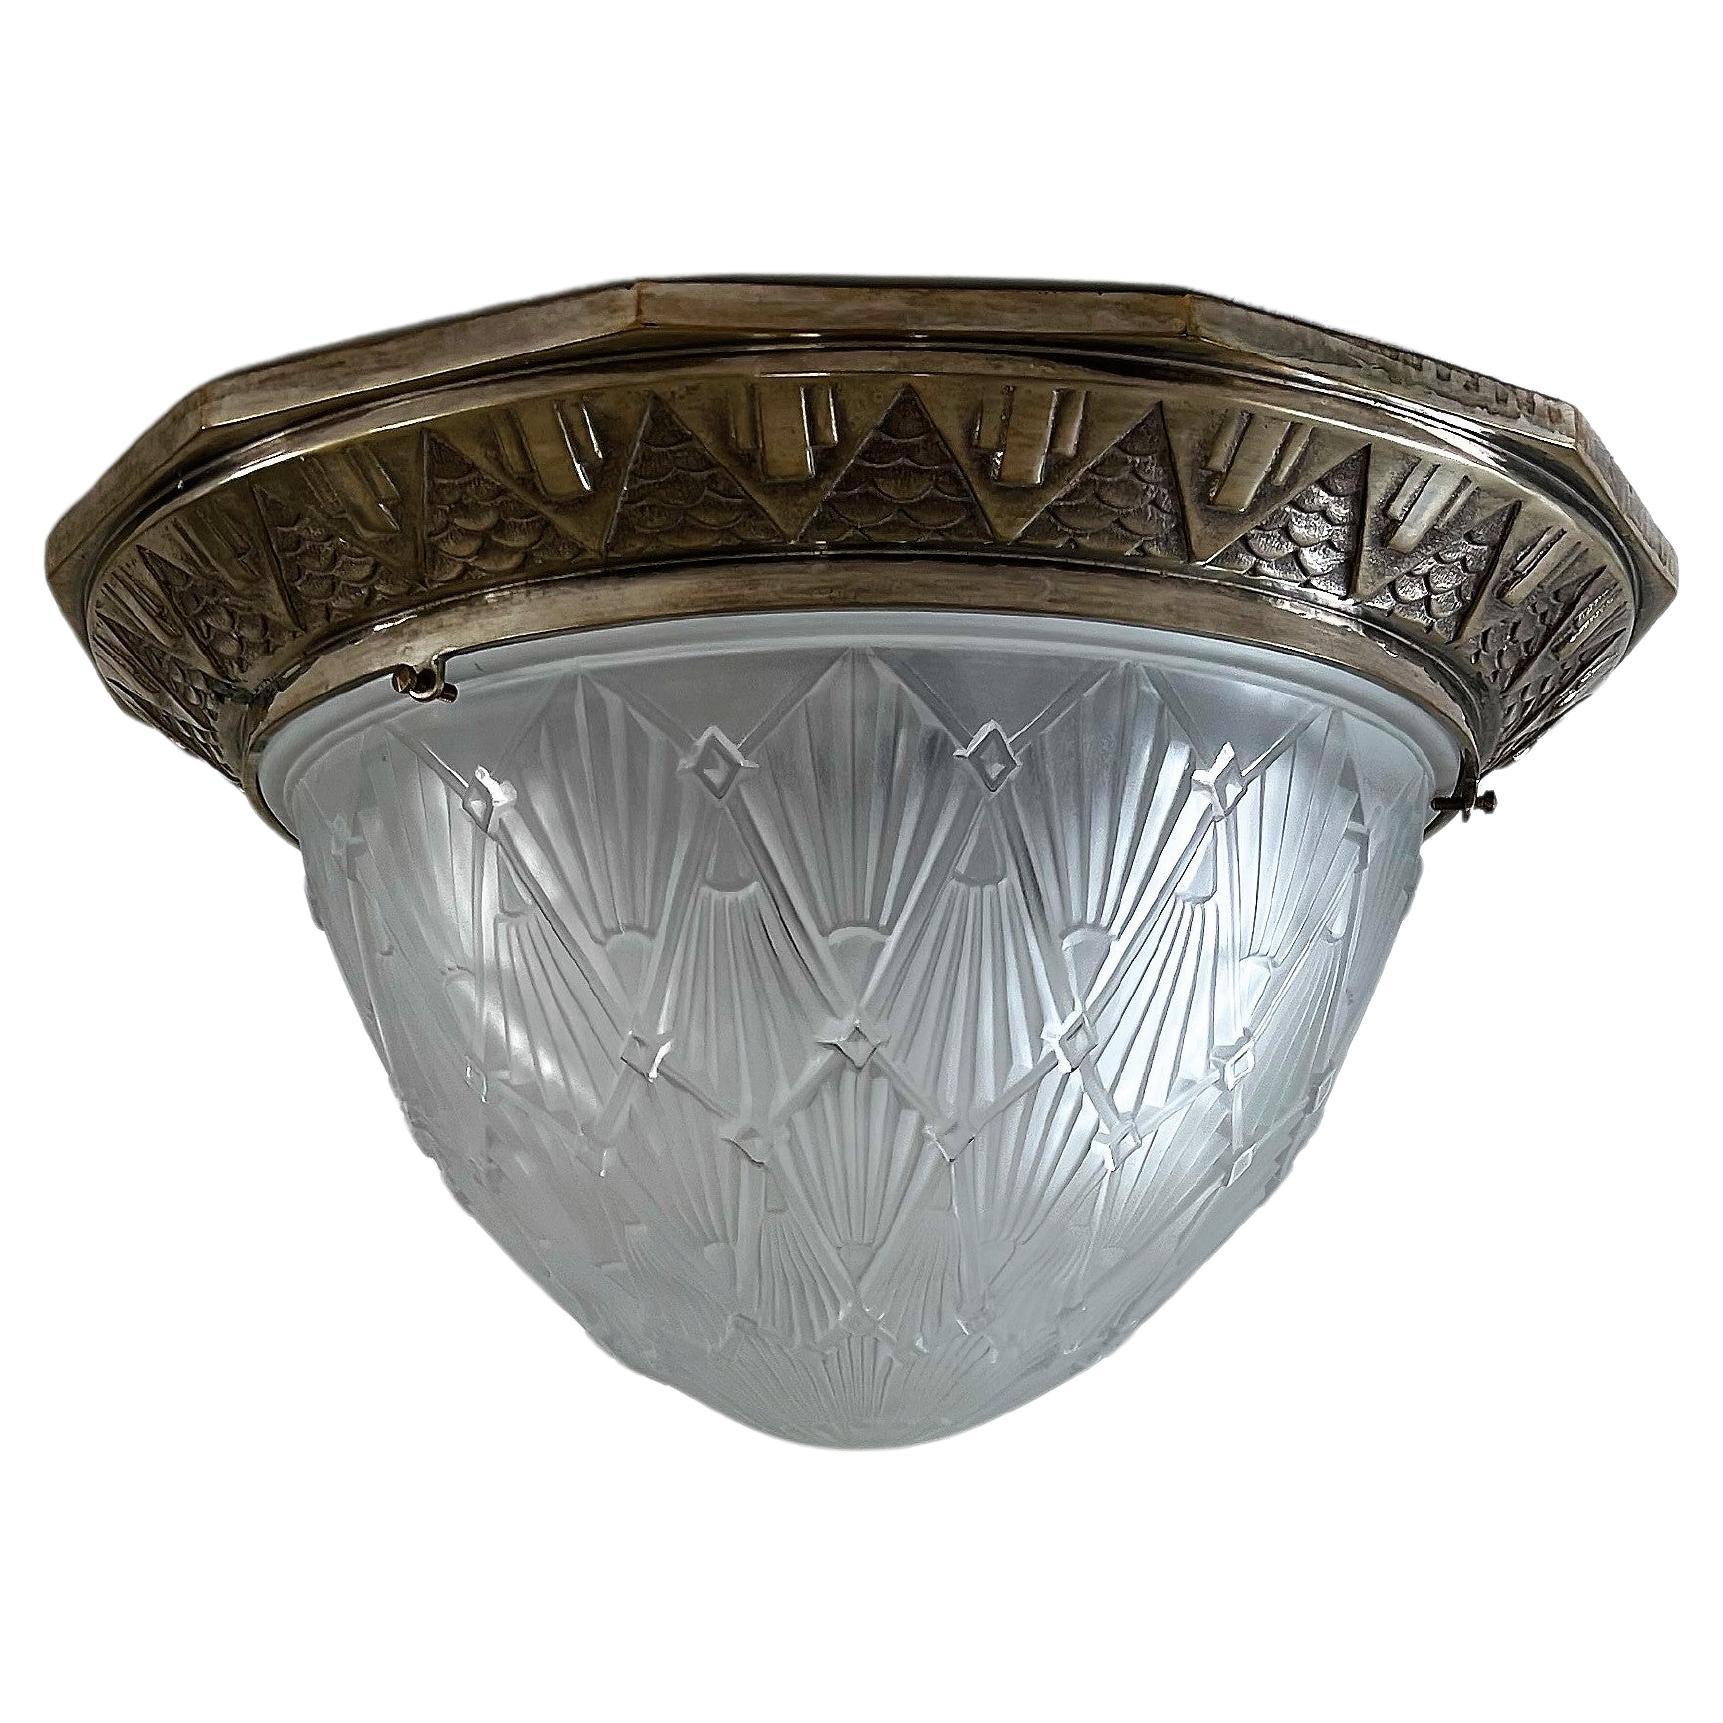 Large Art Deco Dome Flush Mount, Frosted Glas and Nickeled Bronze, France 1930s For Sale